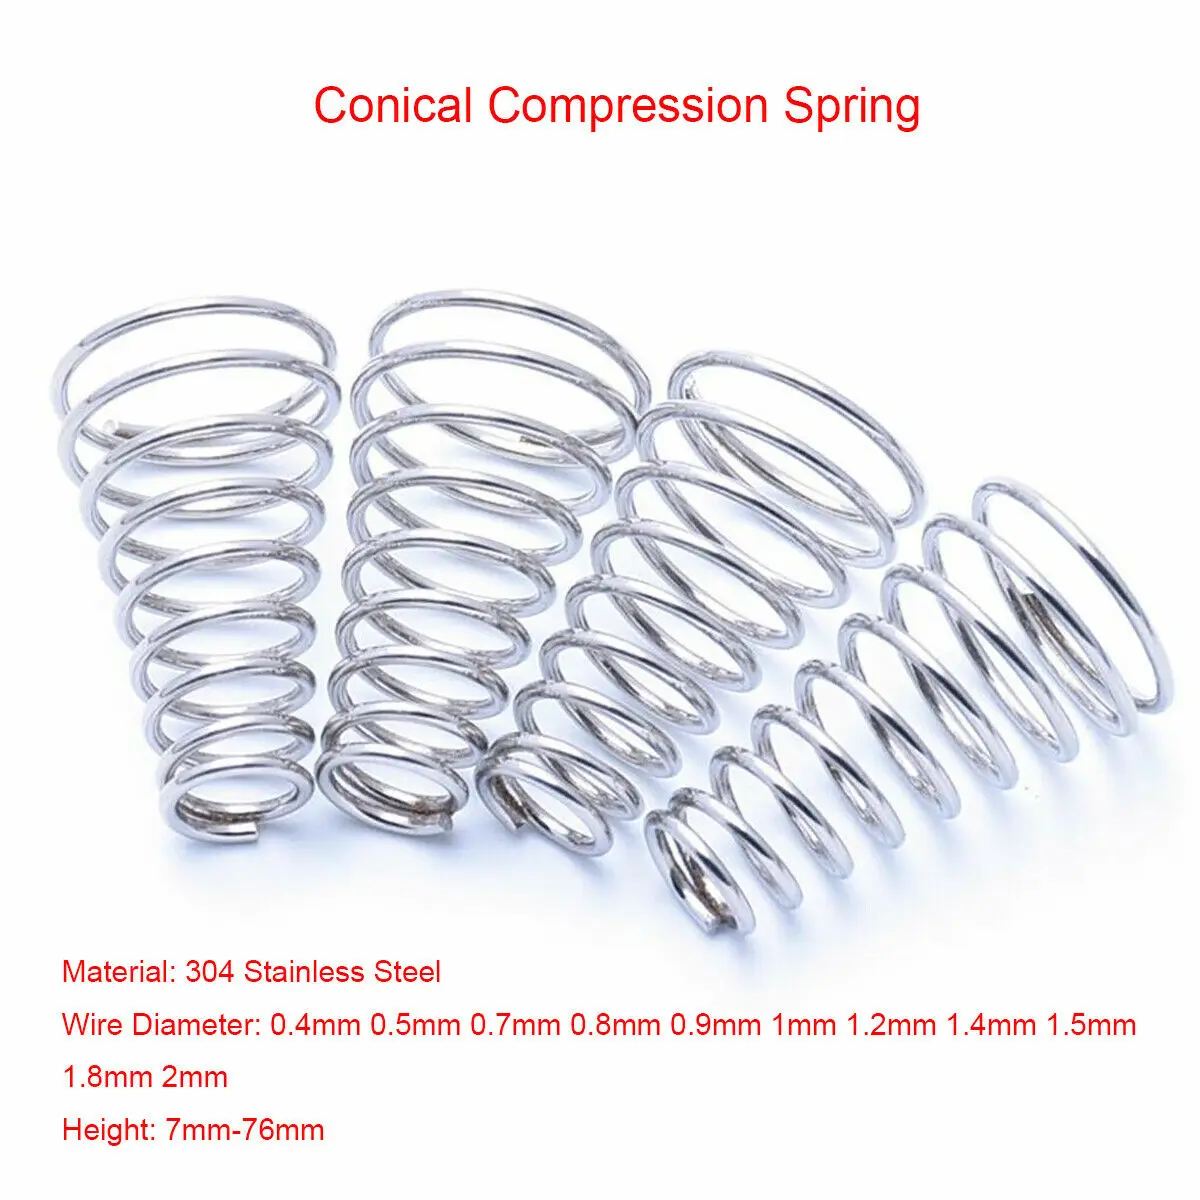 2pcs 0.5mm wire diameter pressure tower springs conical compressed spring 